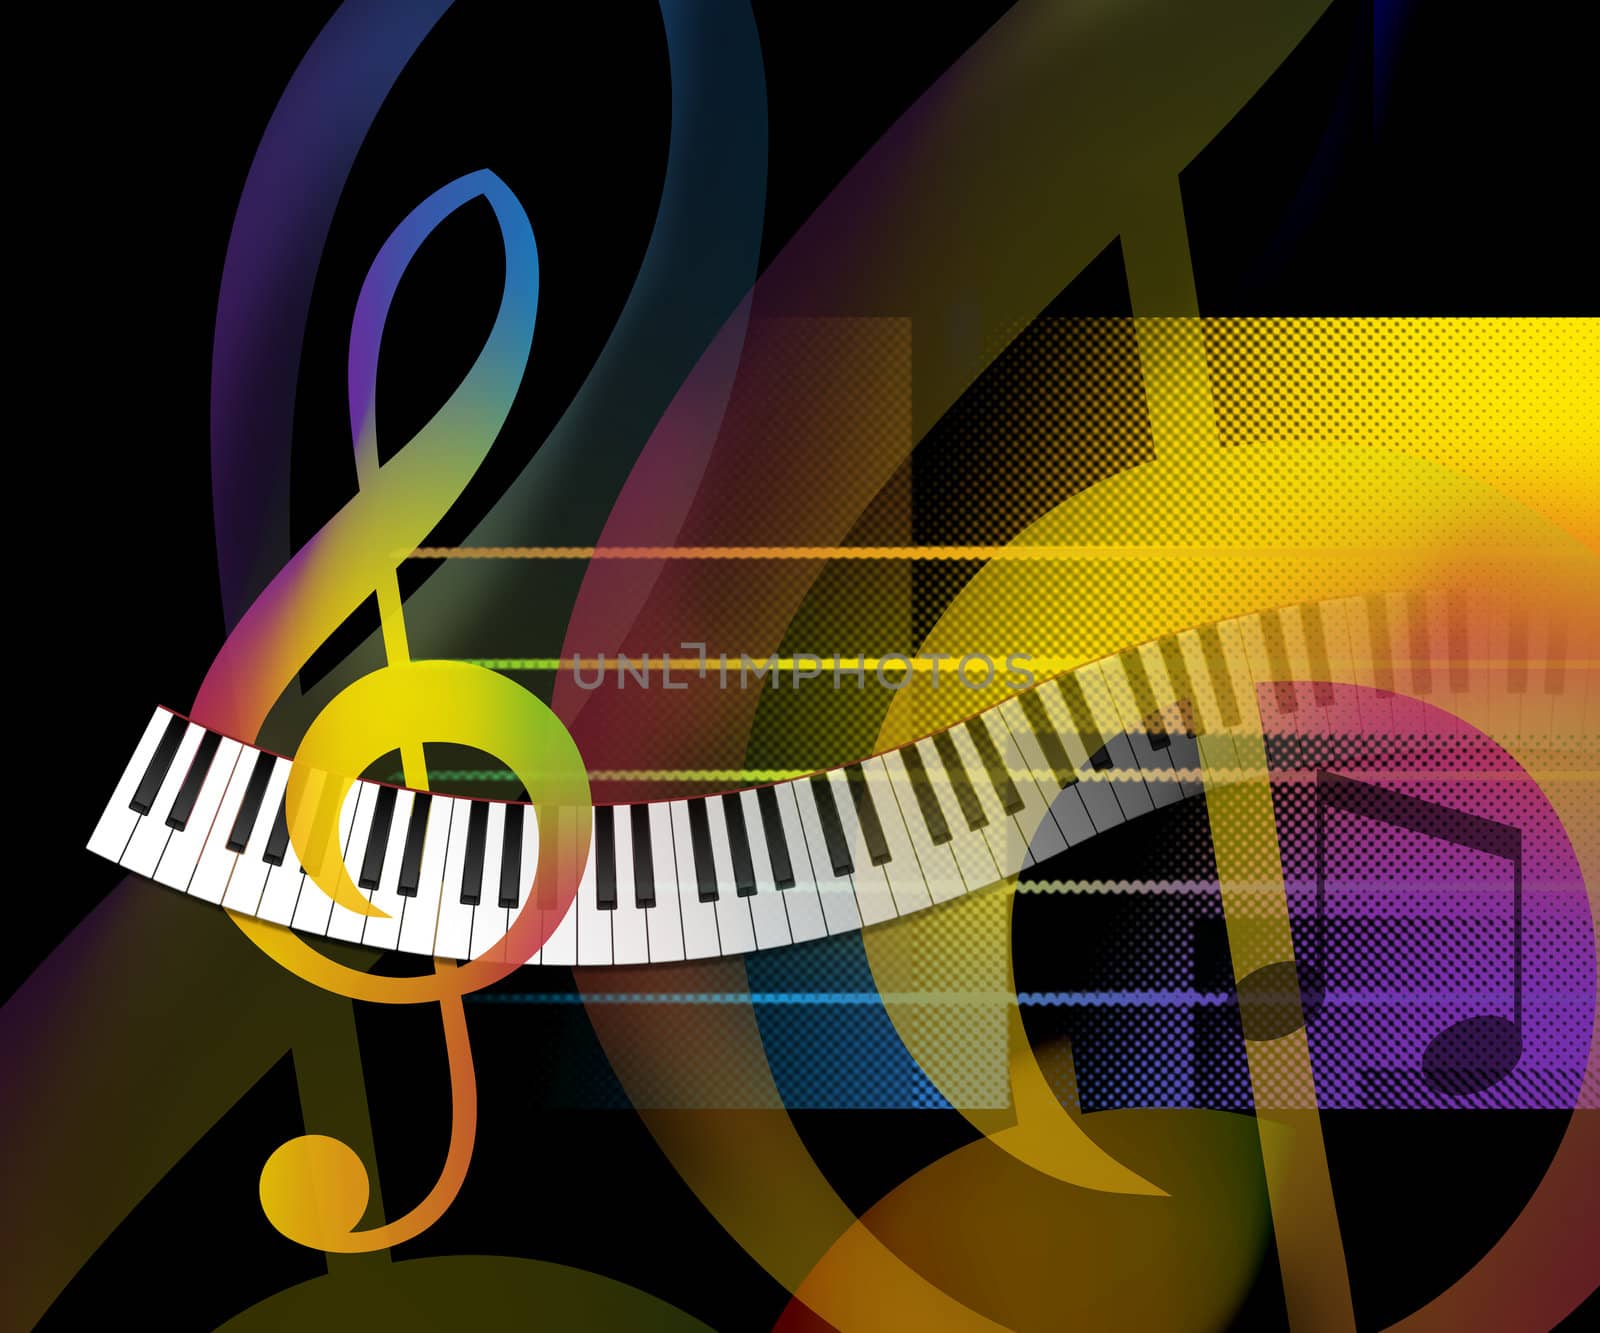 Abstract Music Background With Curved Piano Keys Bitmap Illustration